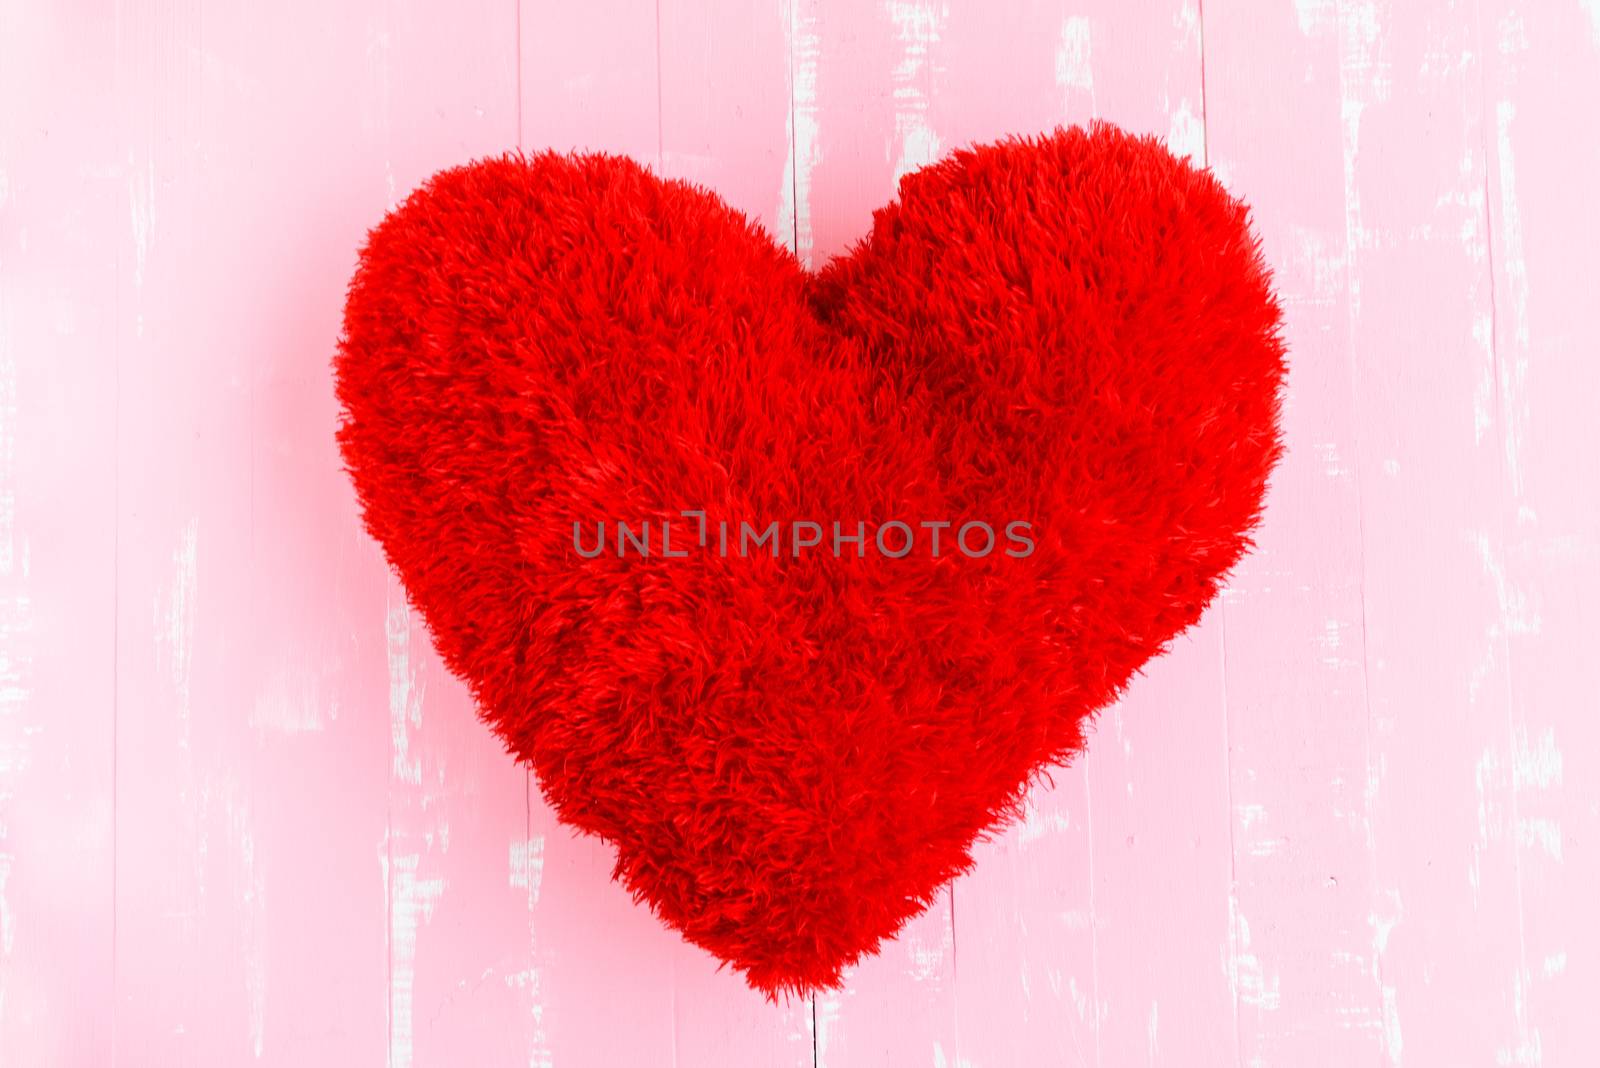 Beautiful big red pillow heart shape on white and pink wooden ba by spukkato